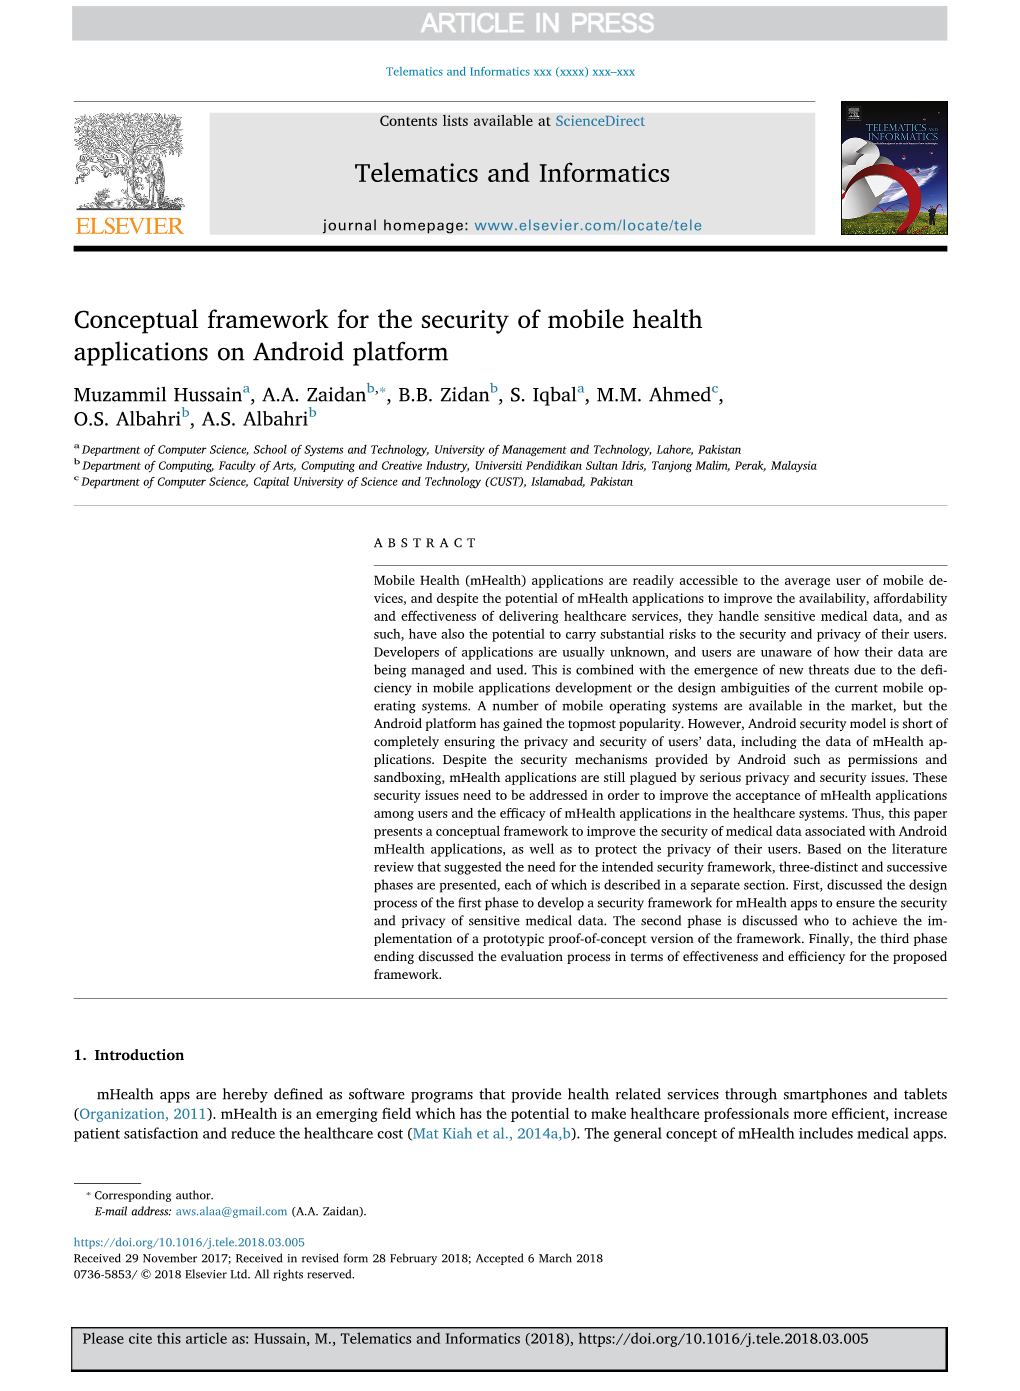 Conceptual Framework for the Security of Mobile Health Applications on Android Platform ⁎ Muzammil Hussaina, A.A